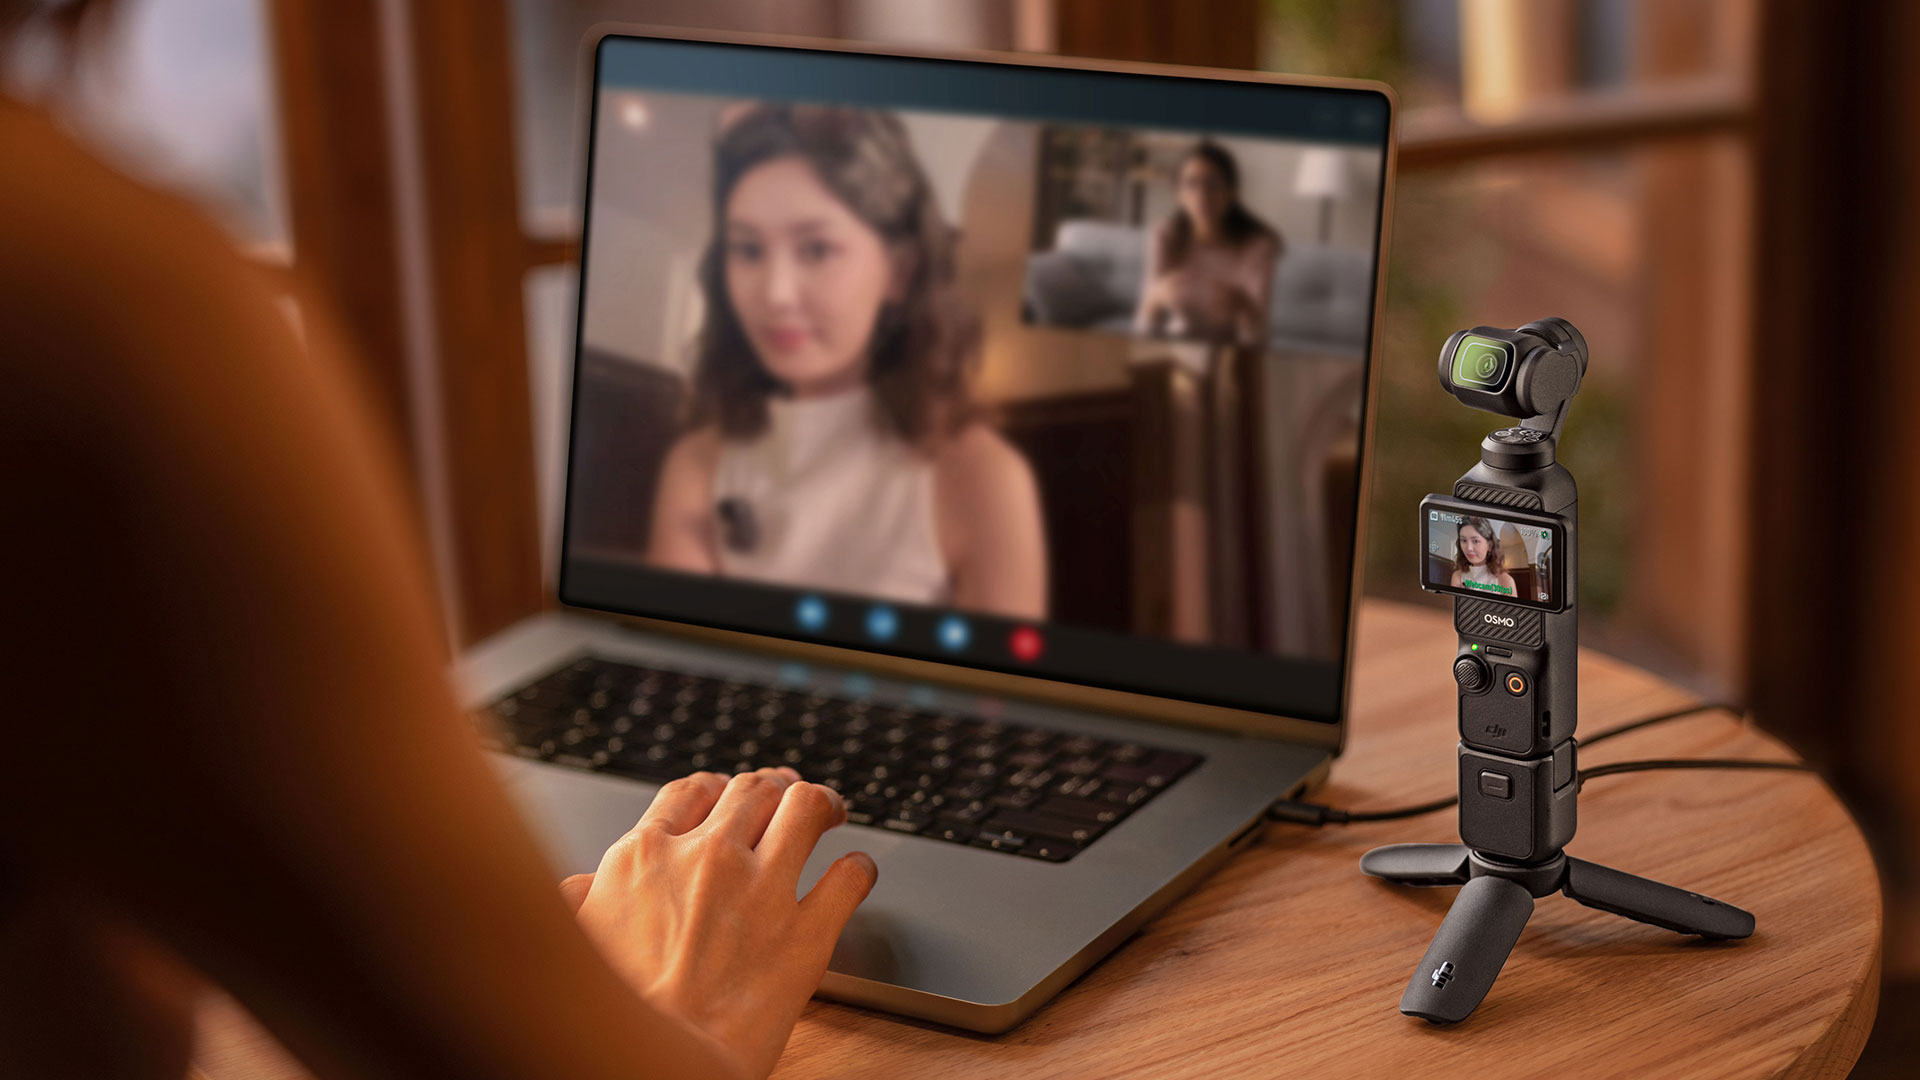 DJI launches Osmo Pocket 3